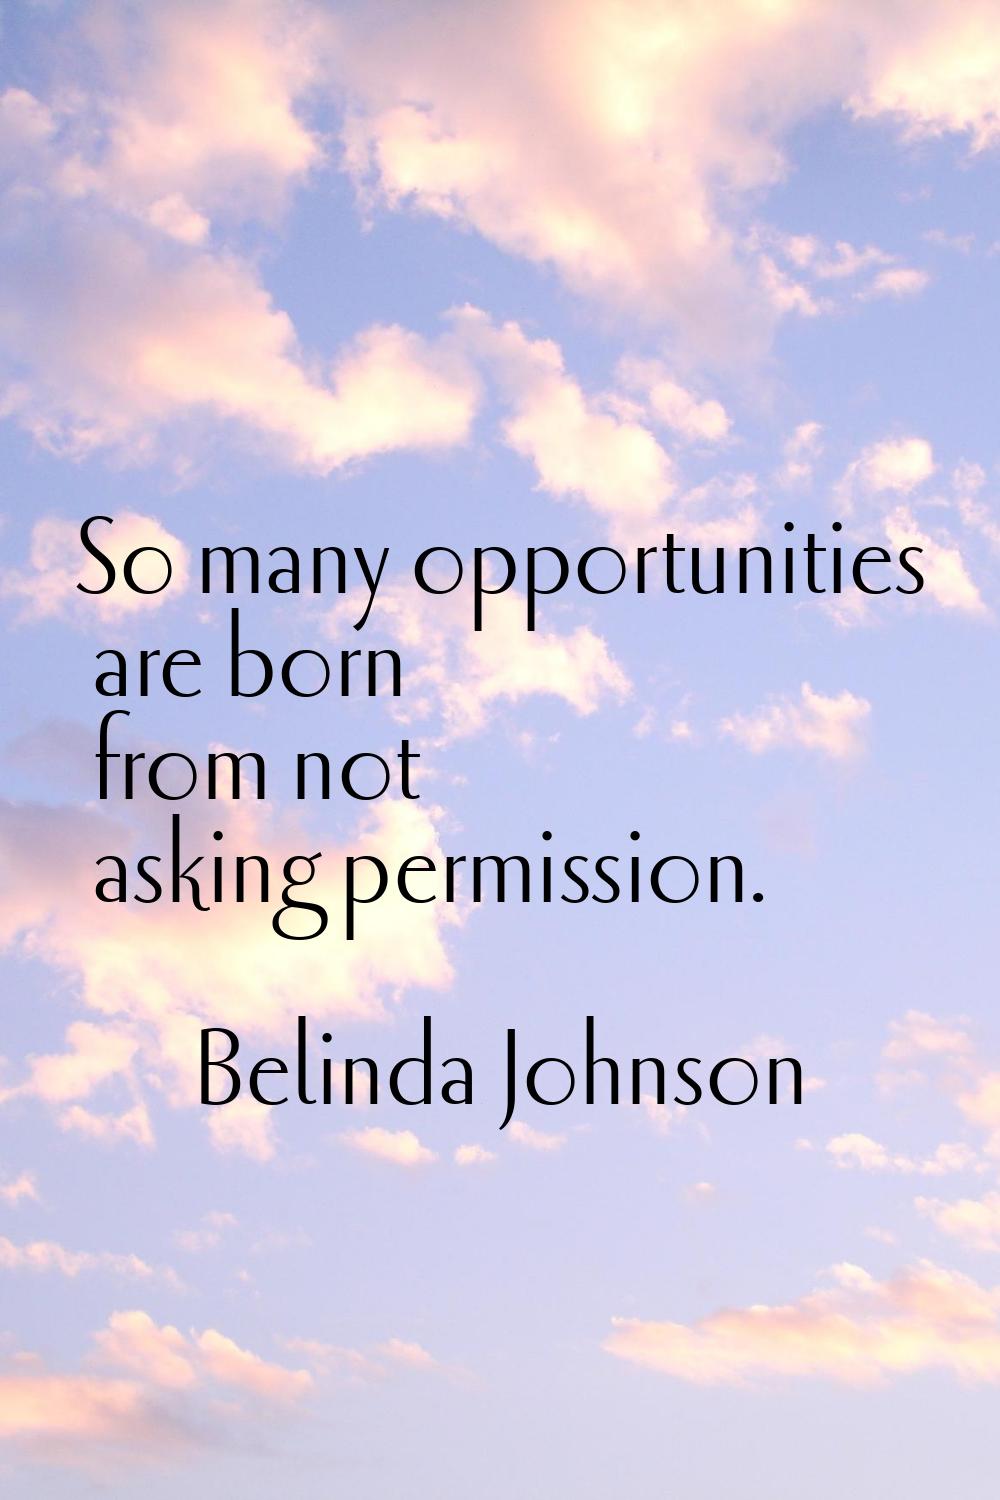 So many opportunities are born from not asking permission.